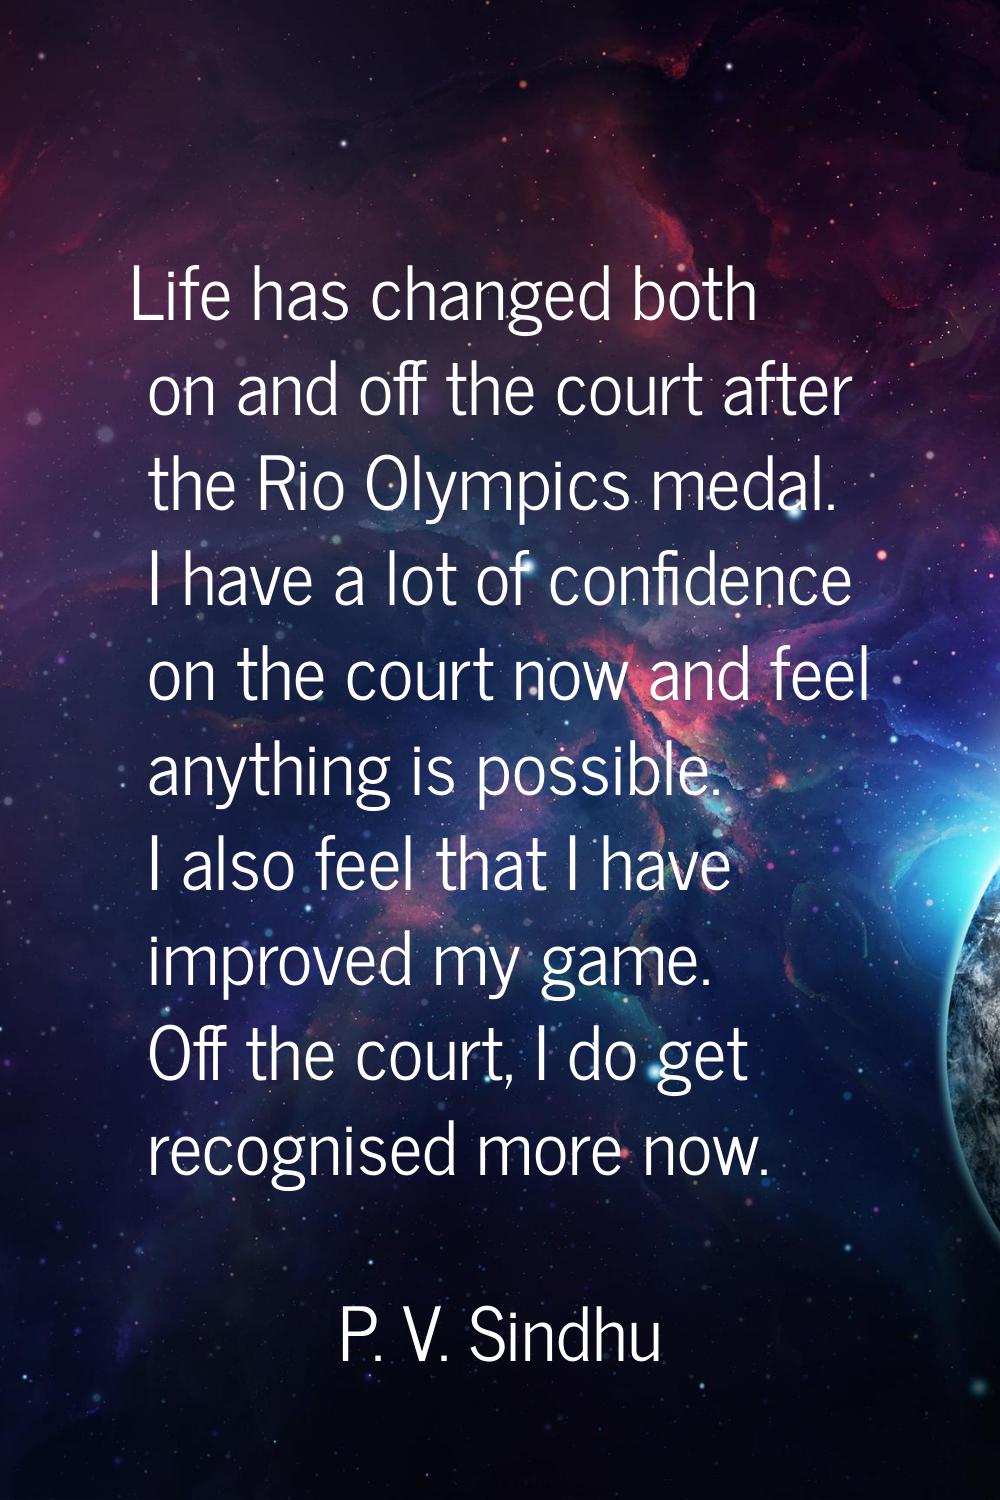 Life has changed both on and off the court after the Rio Olympics medal. I have a lot of confidence